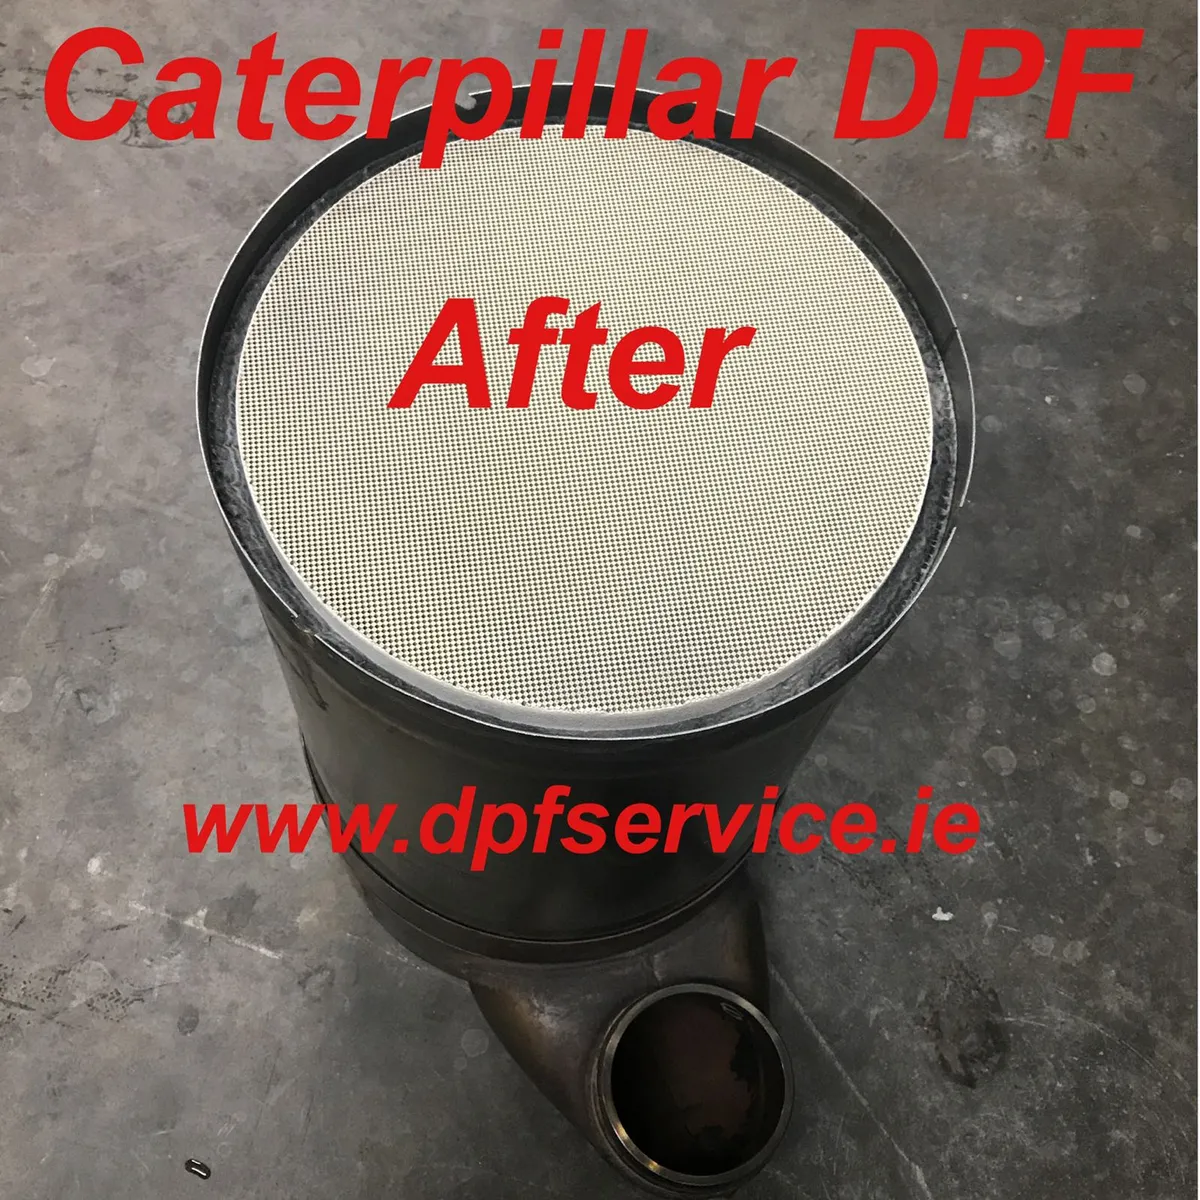 Professional DPF CLEANING nationwide collection - Image 1